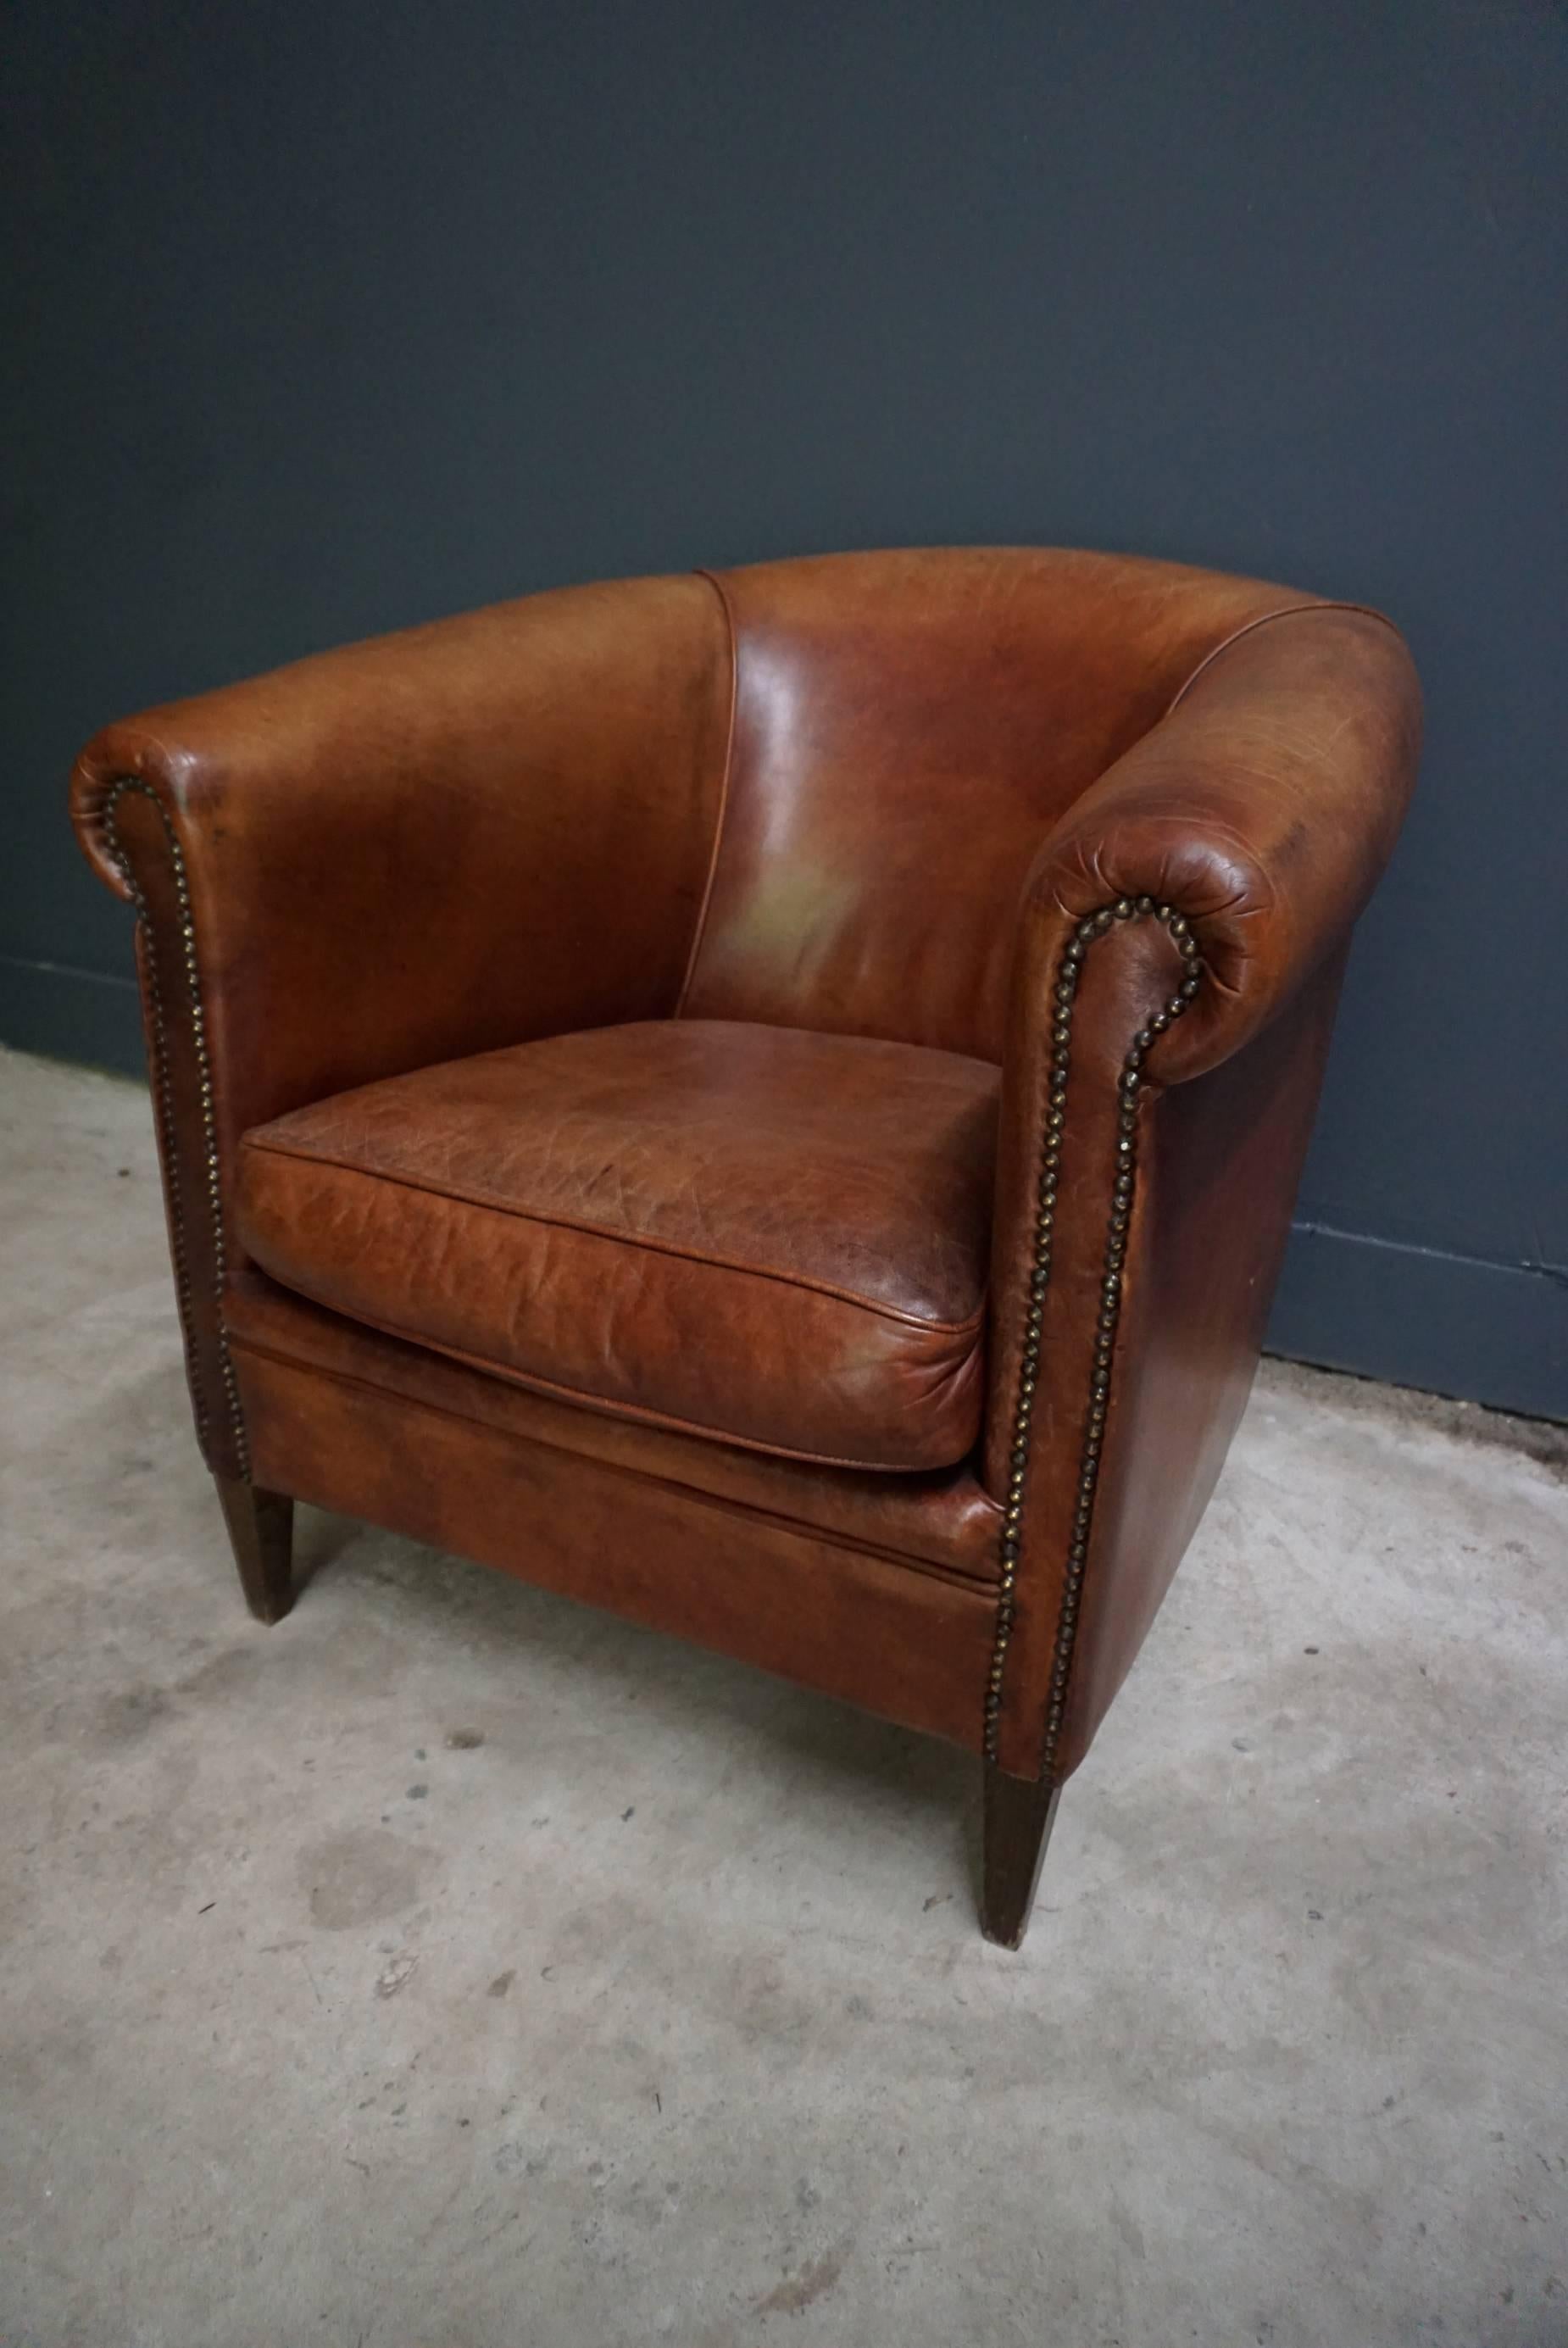 This vintage club chair is upholstered with cognac-colored leather and features metal pins and wooden legs.